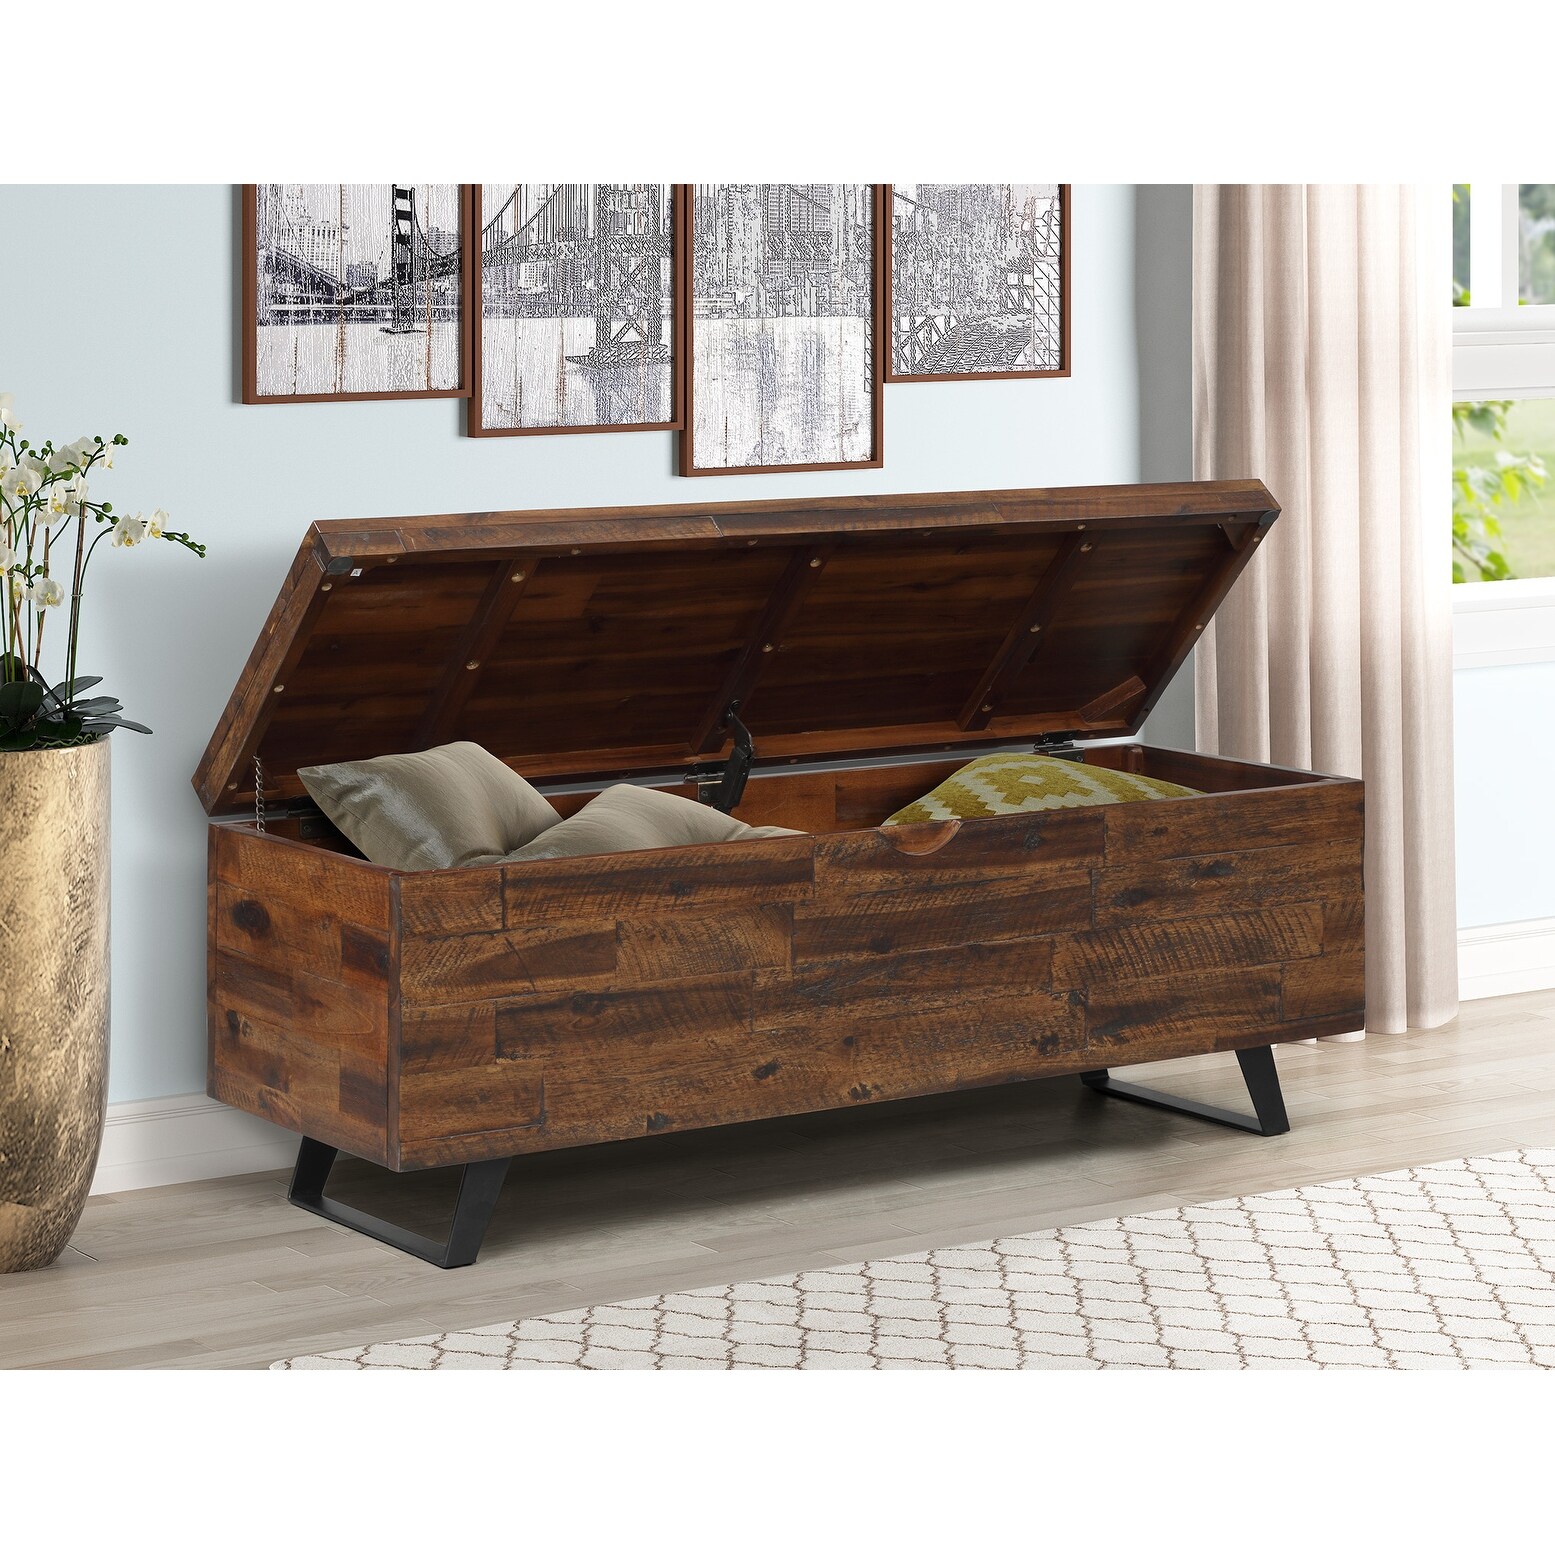 https://ak1.ostkcdn.com/images/products/is/images/direct/3e094310e284771090c9158c1561ec041dfdb3fb/Broadmore-46-inch-Acacia-Wood-Storage-Bench.jpg